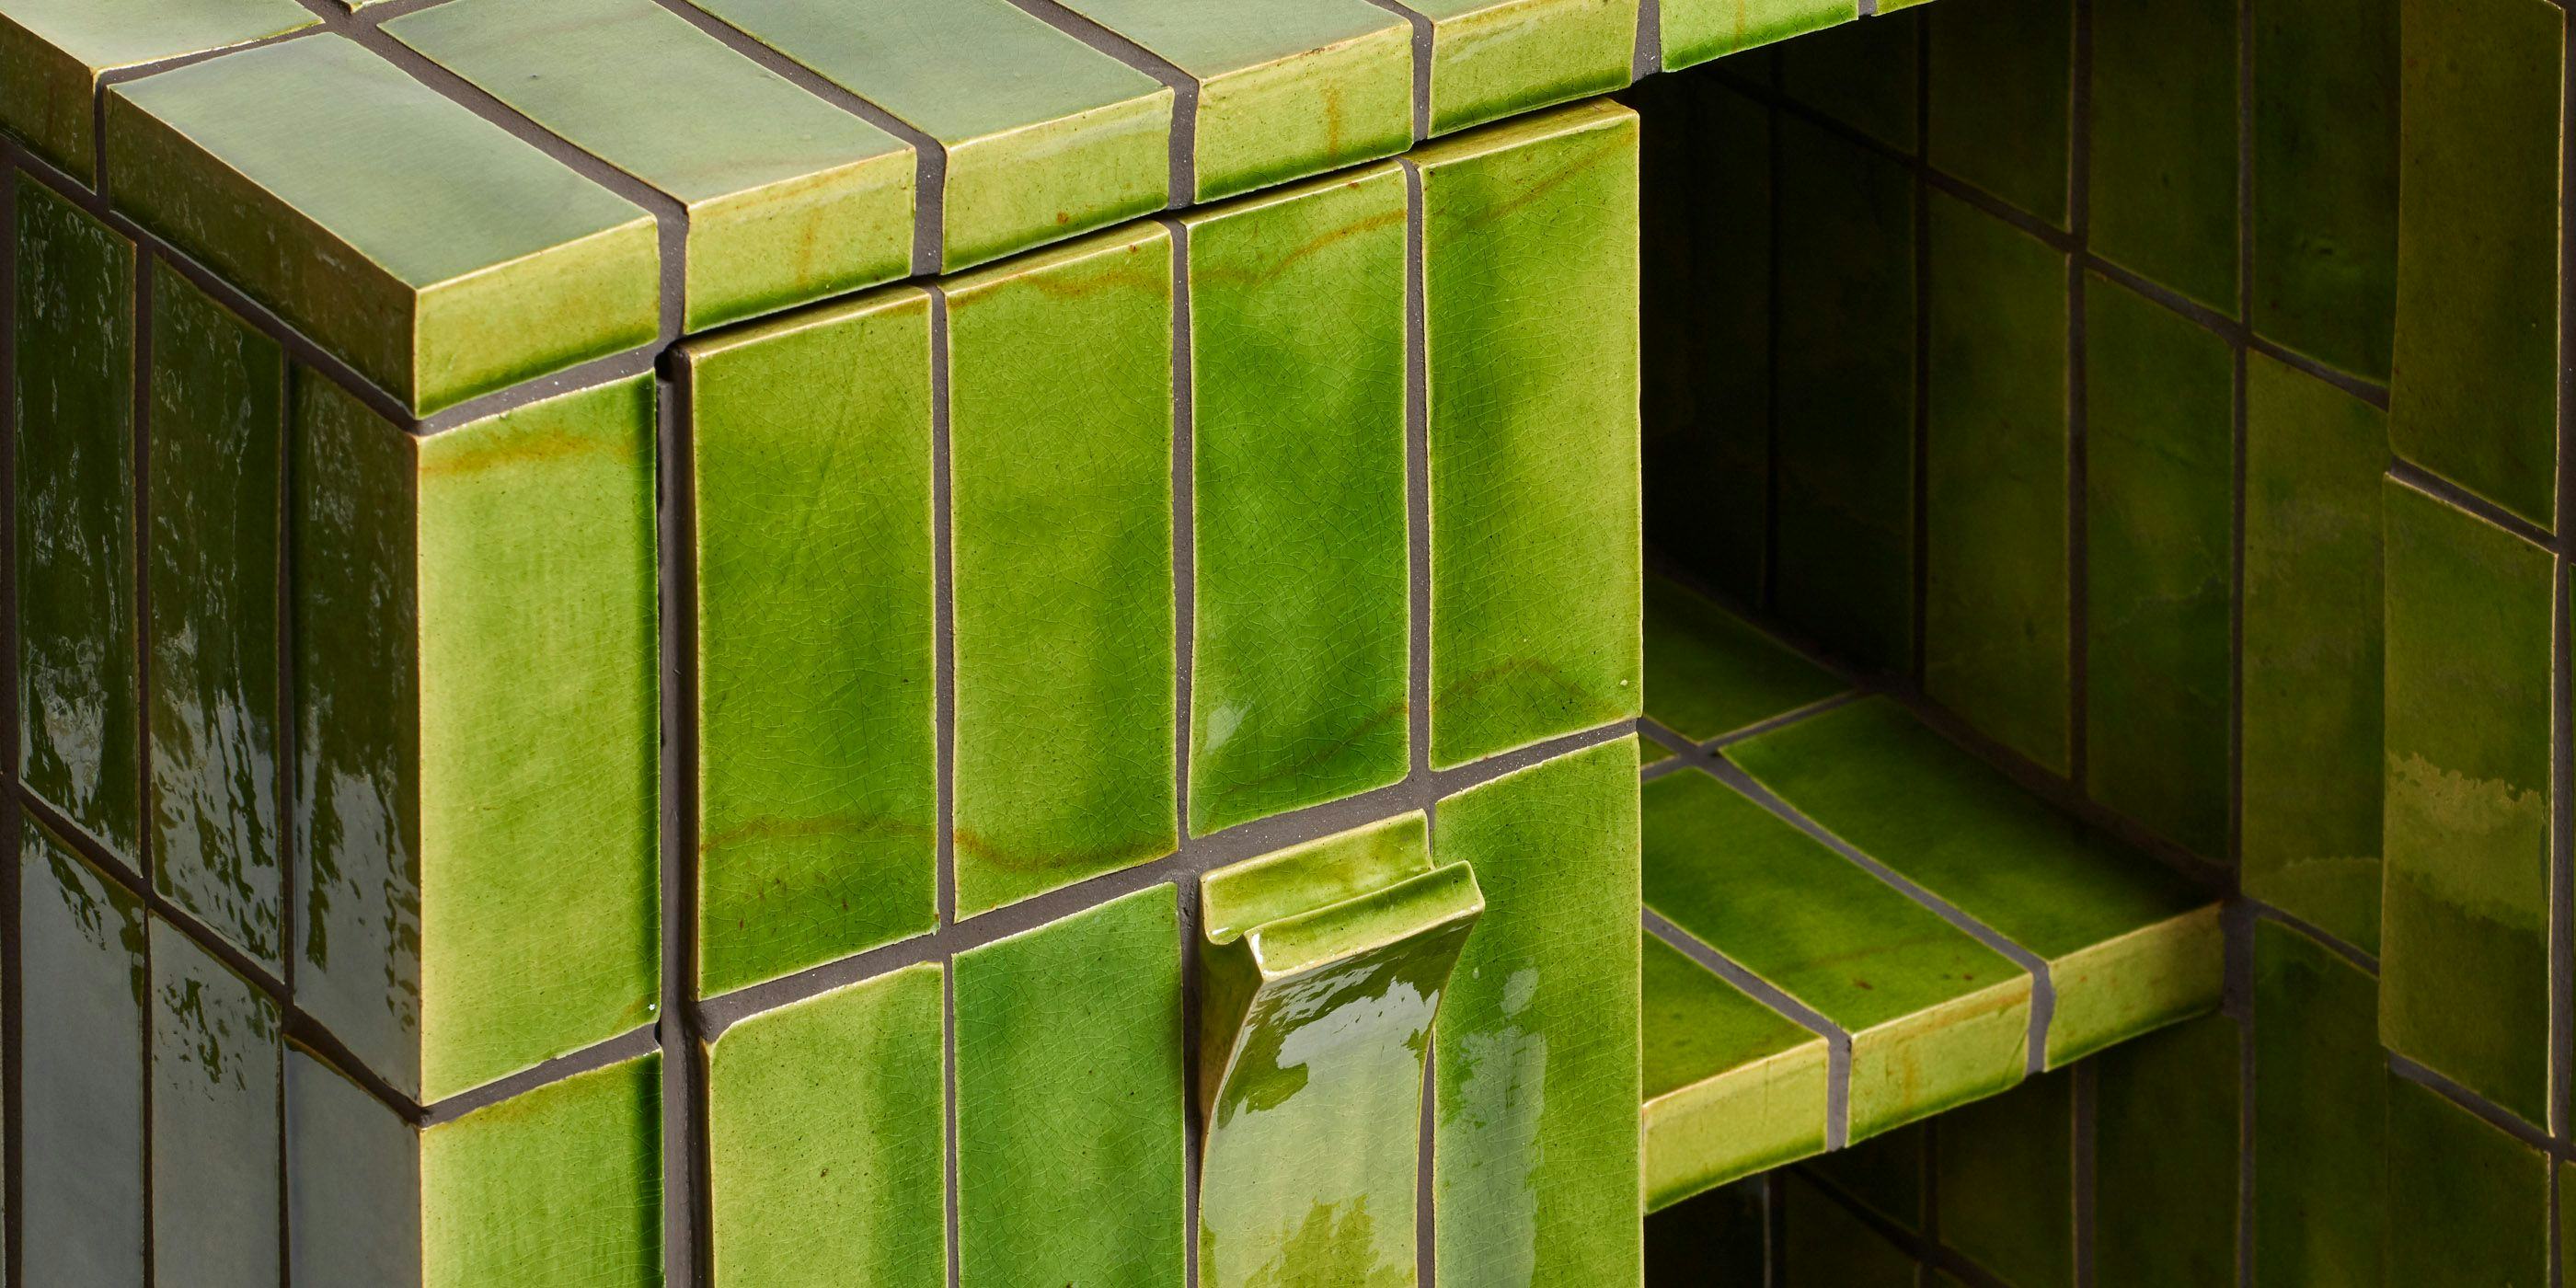 A detail of a green tiled cupboard showing the front and inside